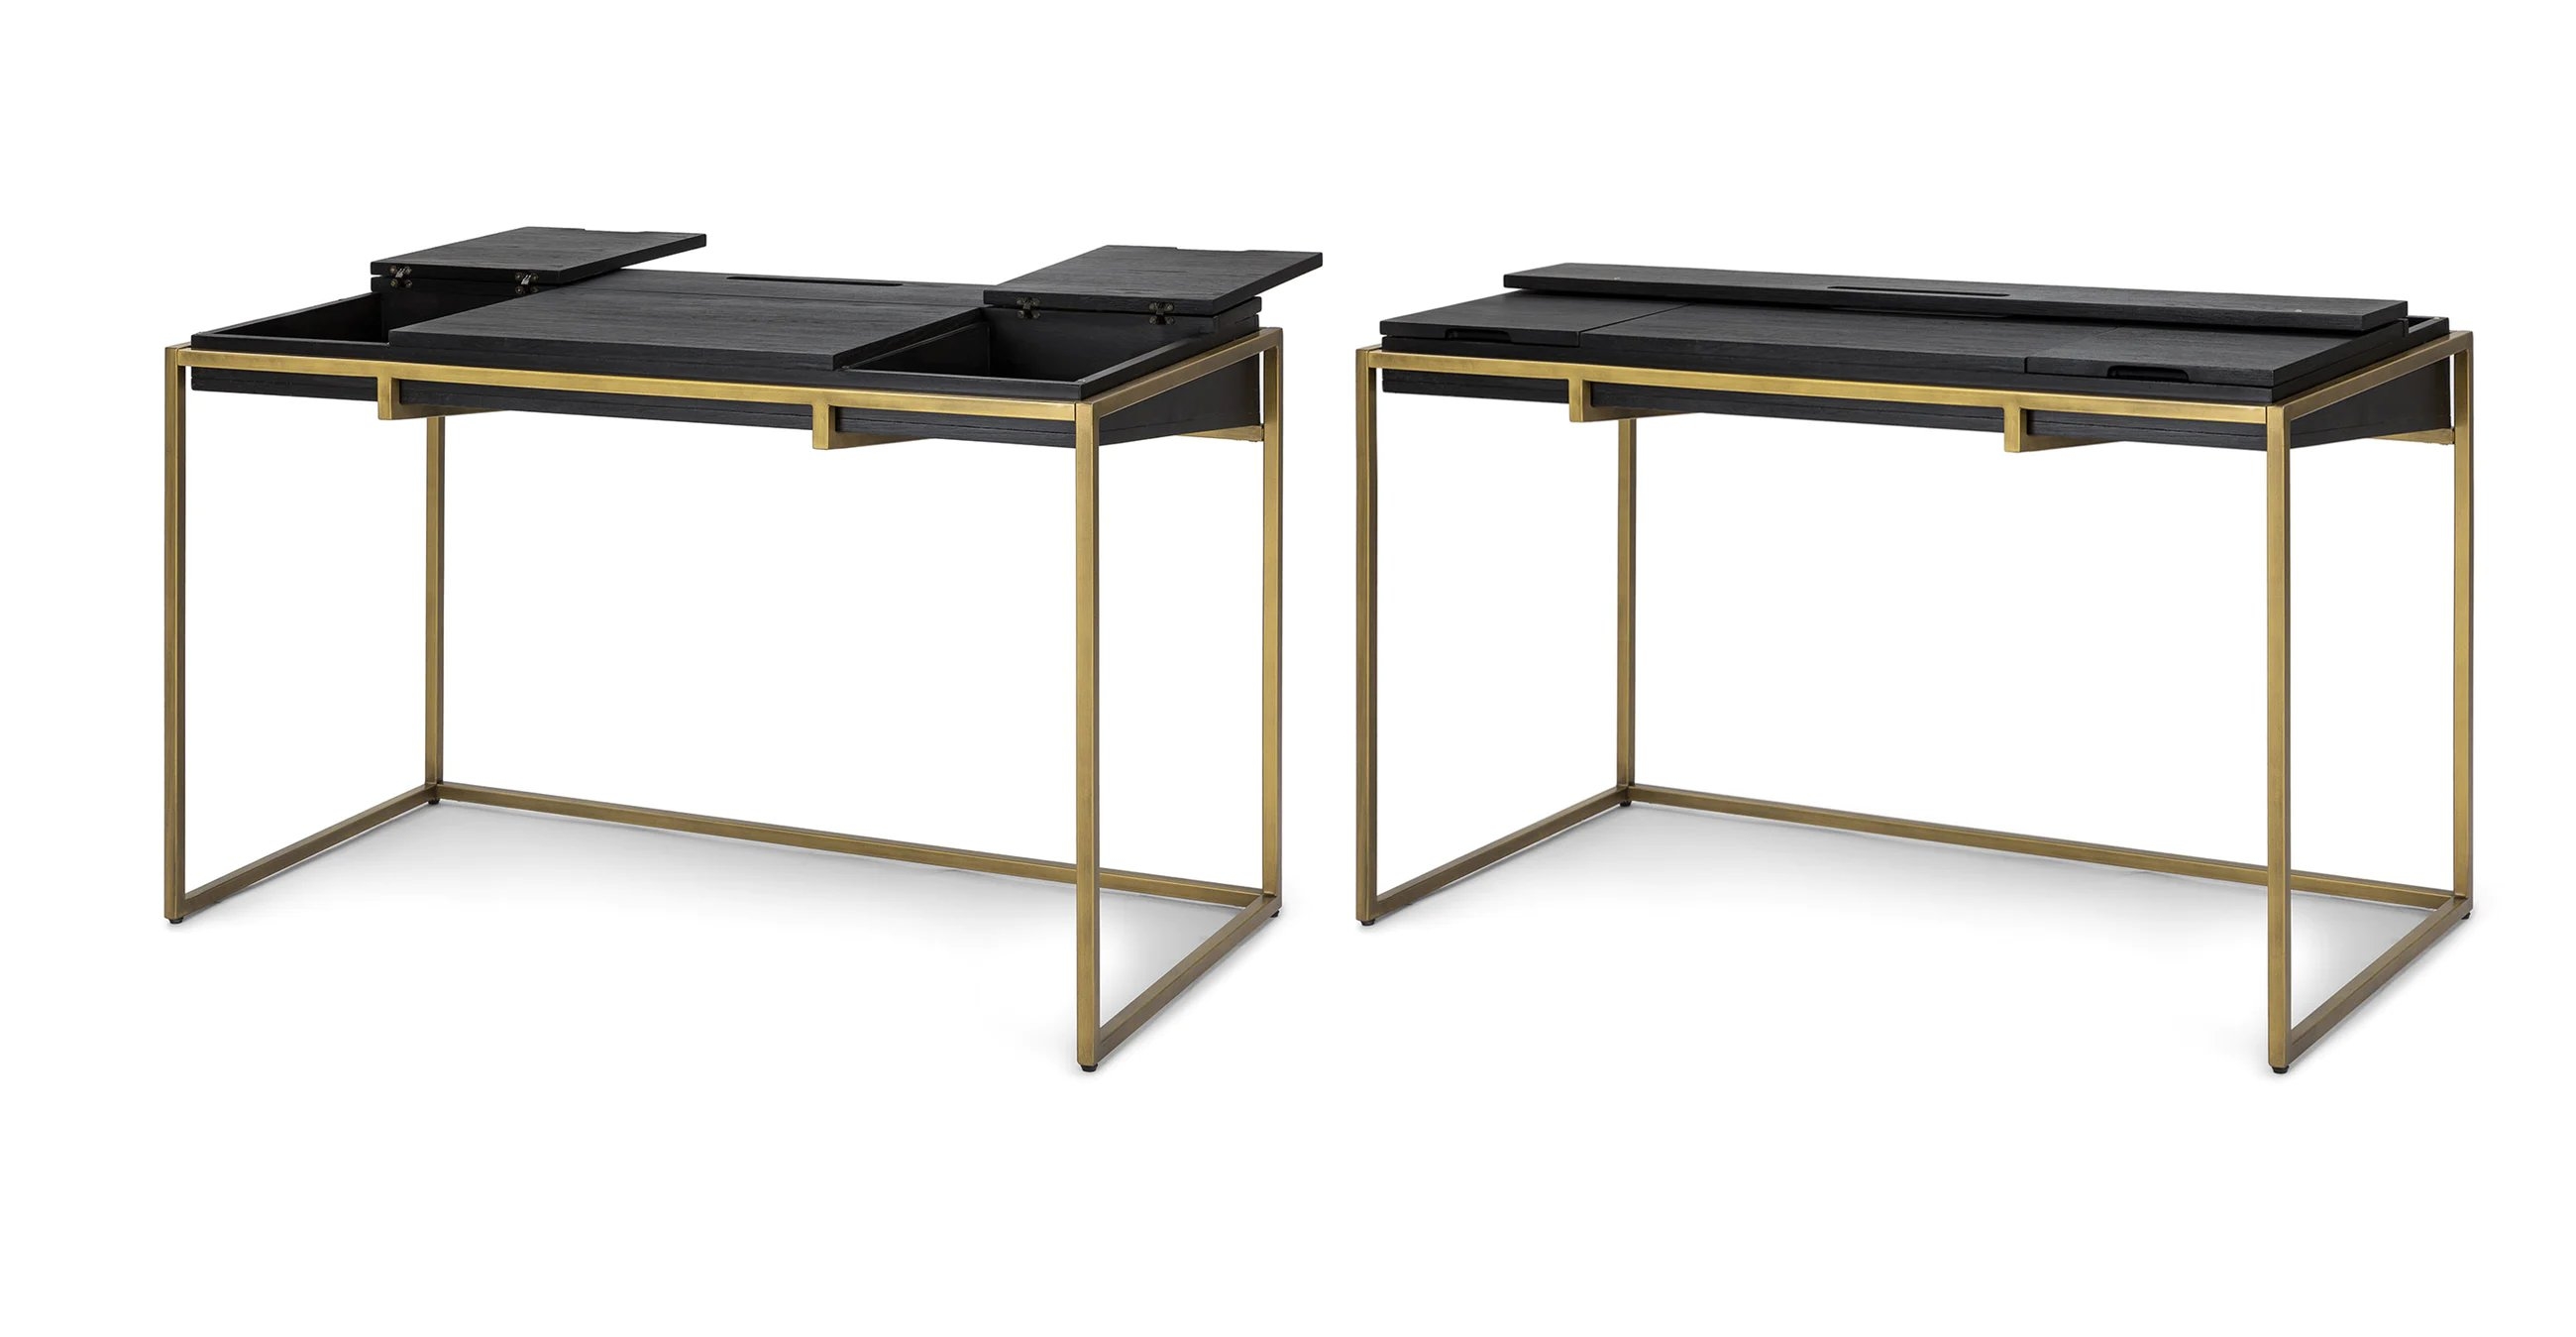 Oscuro Black and Brass Desk - Image 1